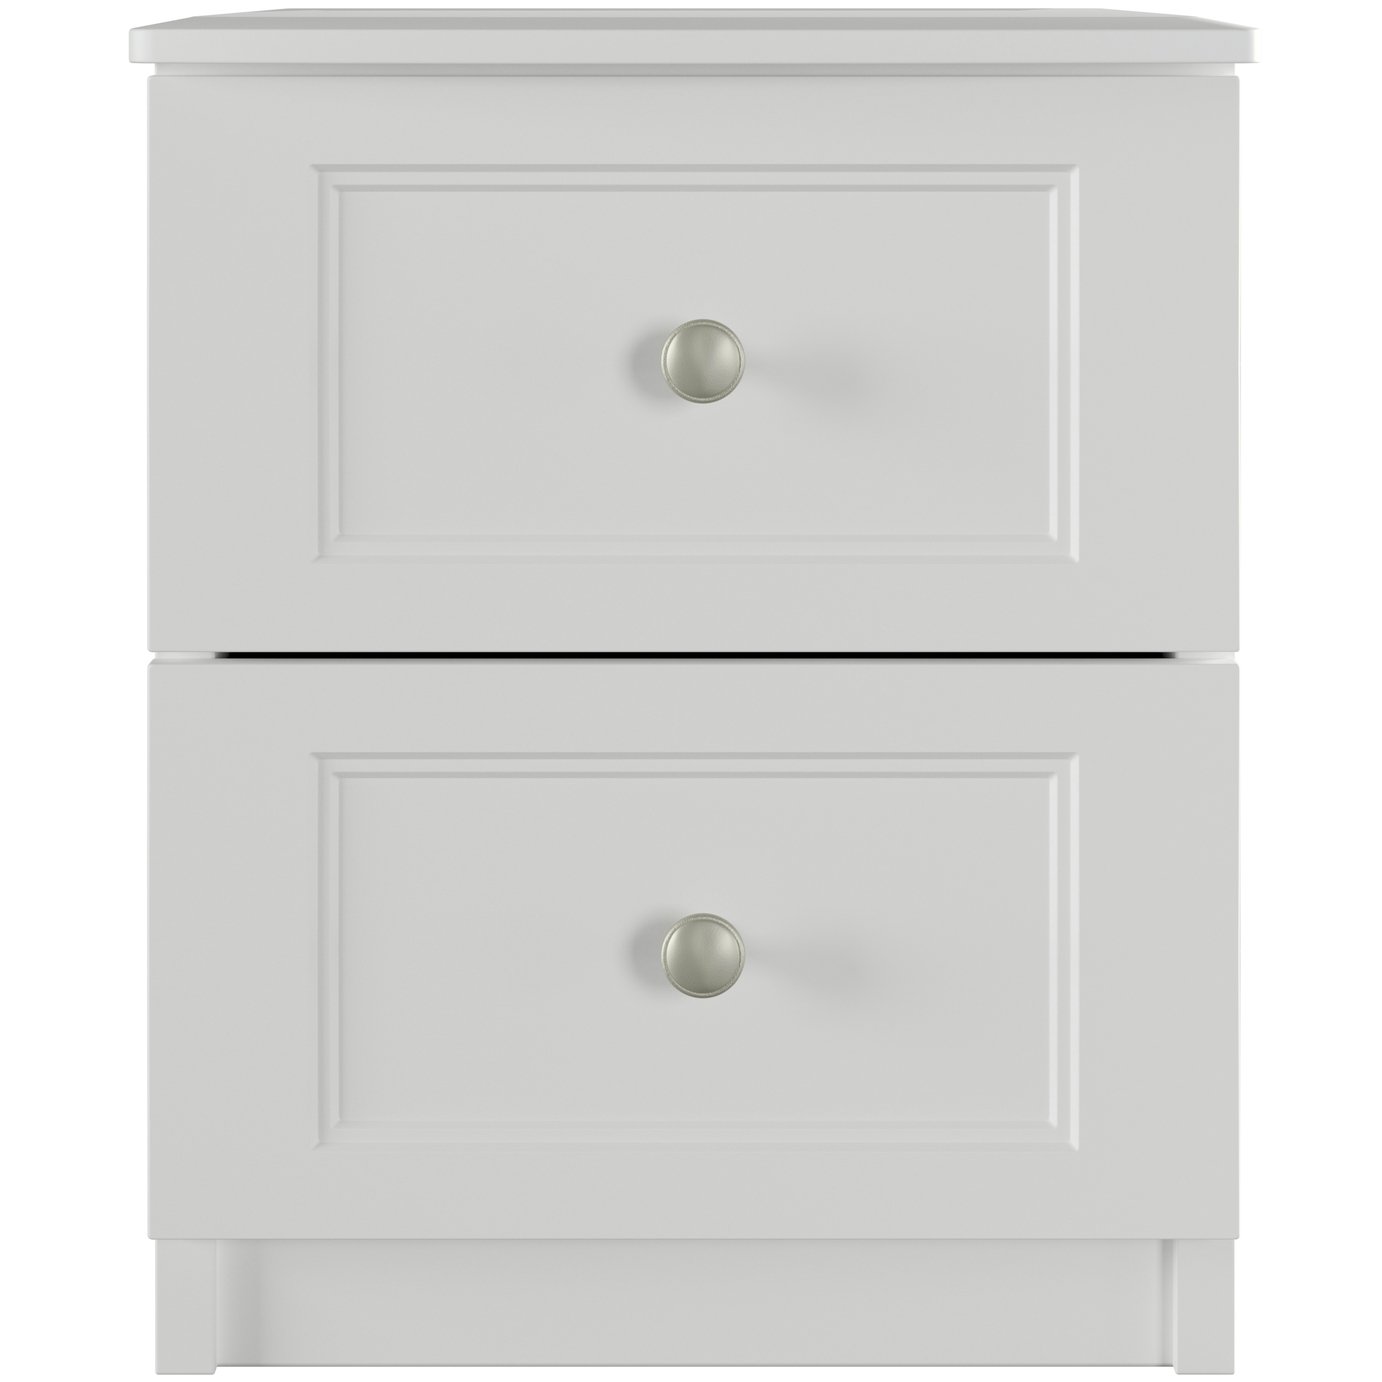 One Call Bexley 2 Drawer Bedside Table - White